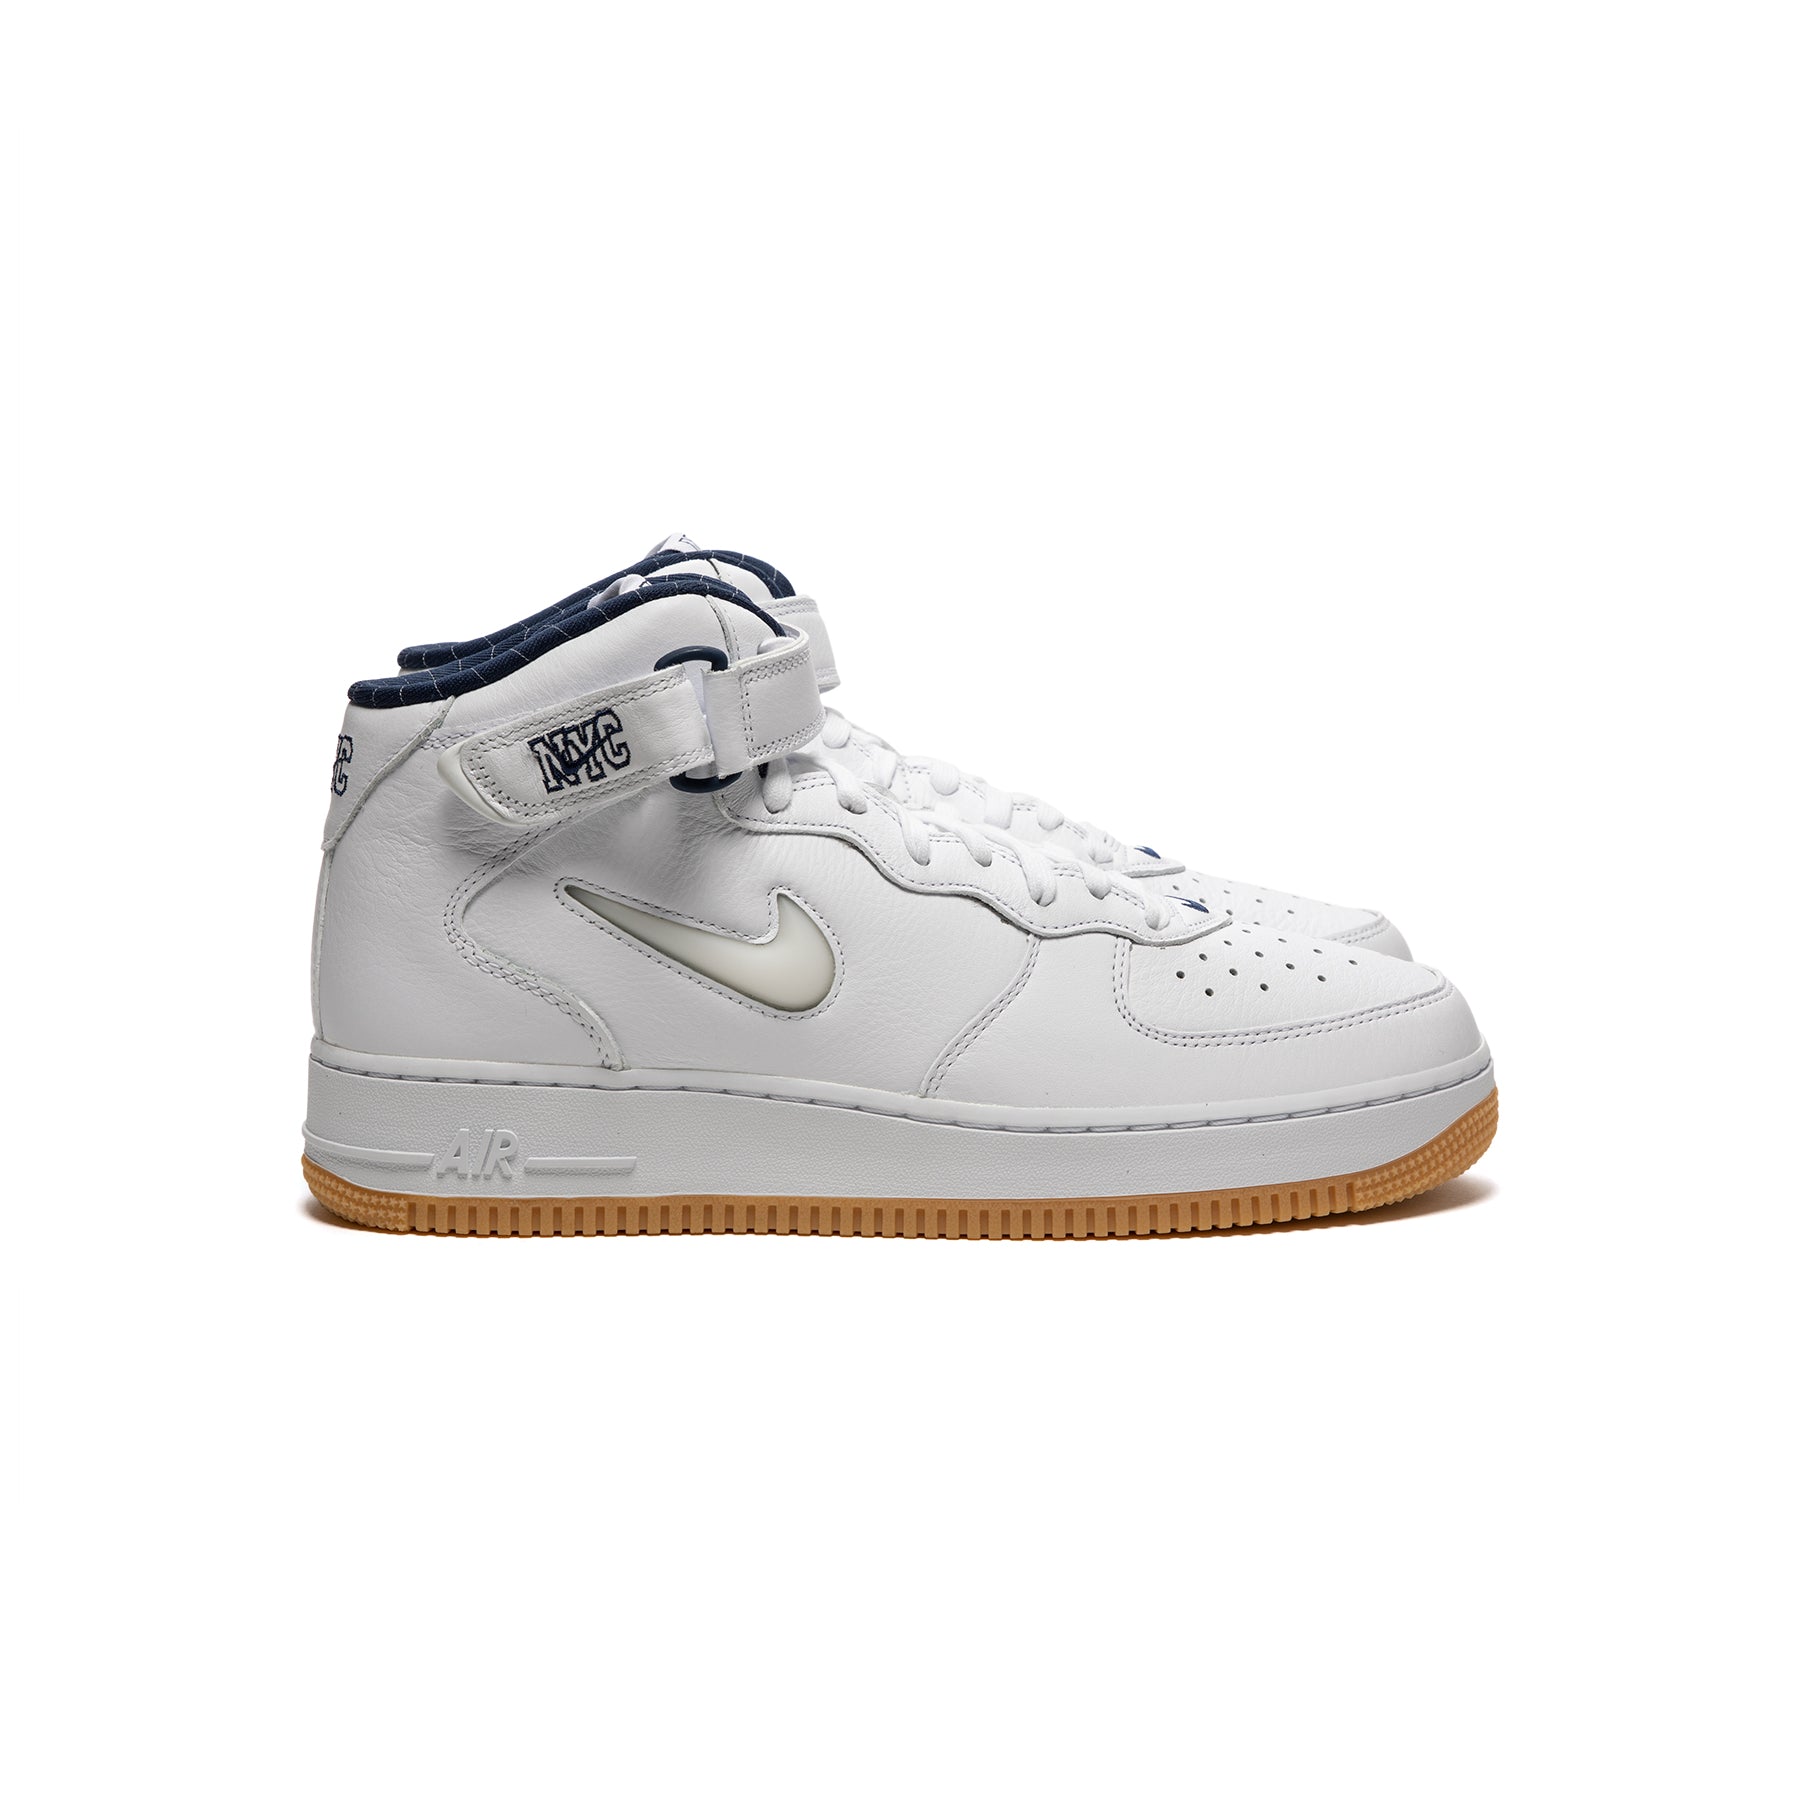 kat roman medeleerling Nike Air Force 1 Mid (White/Midnight Navy/Gum Yellow) – Concepts